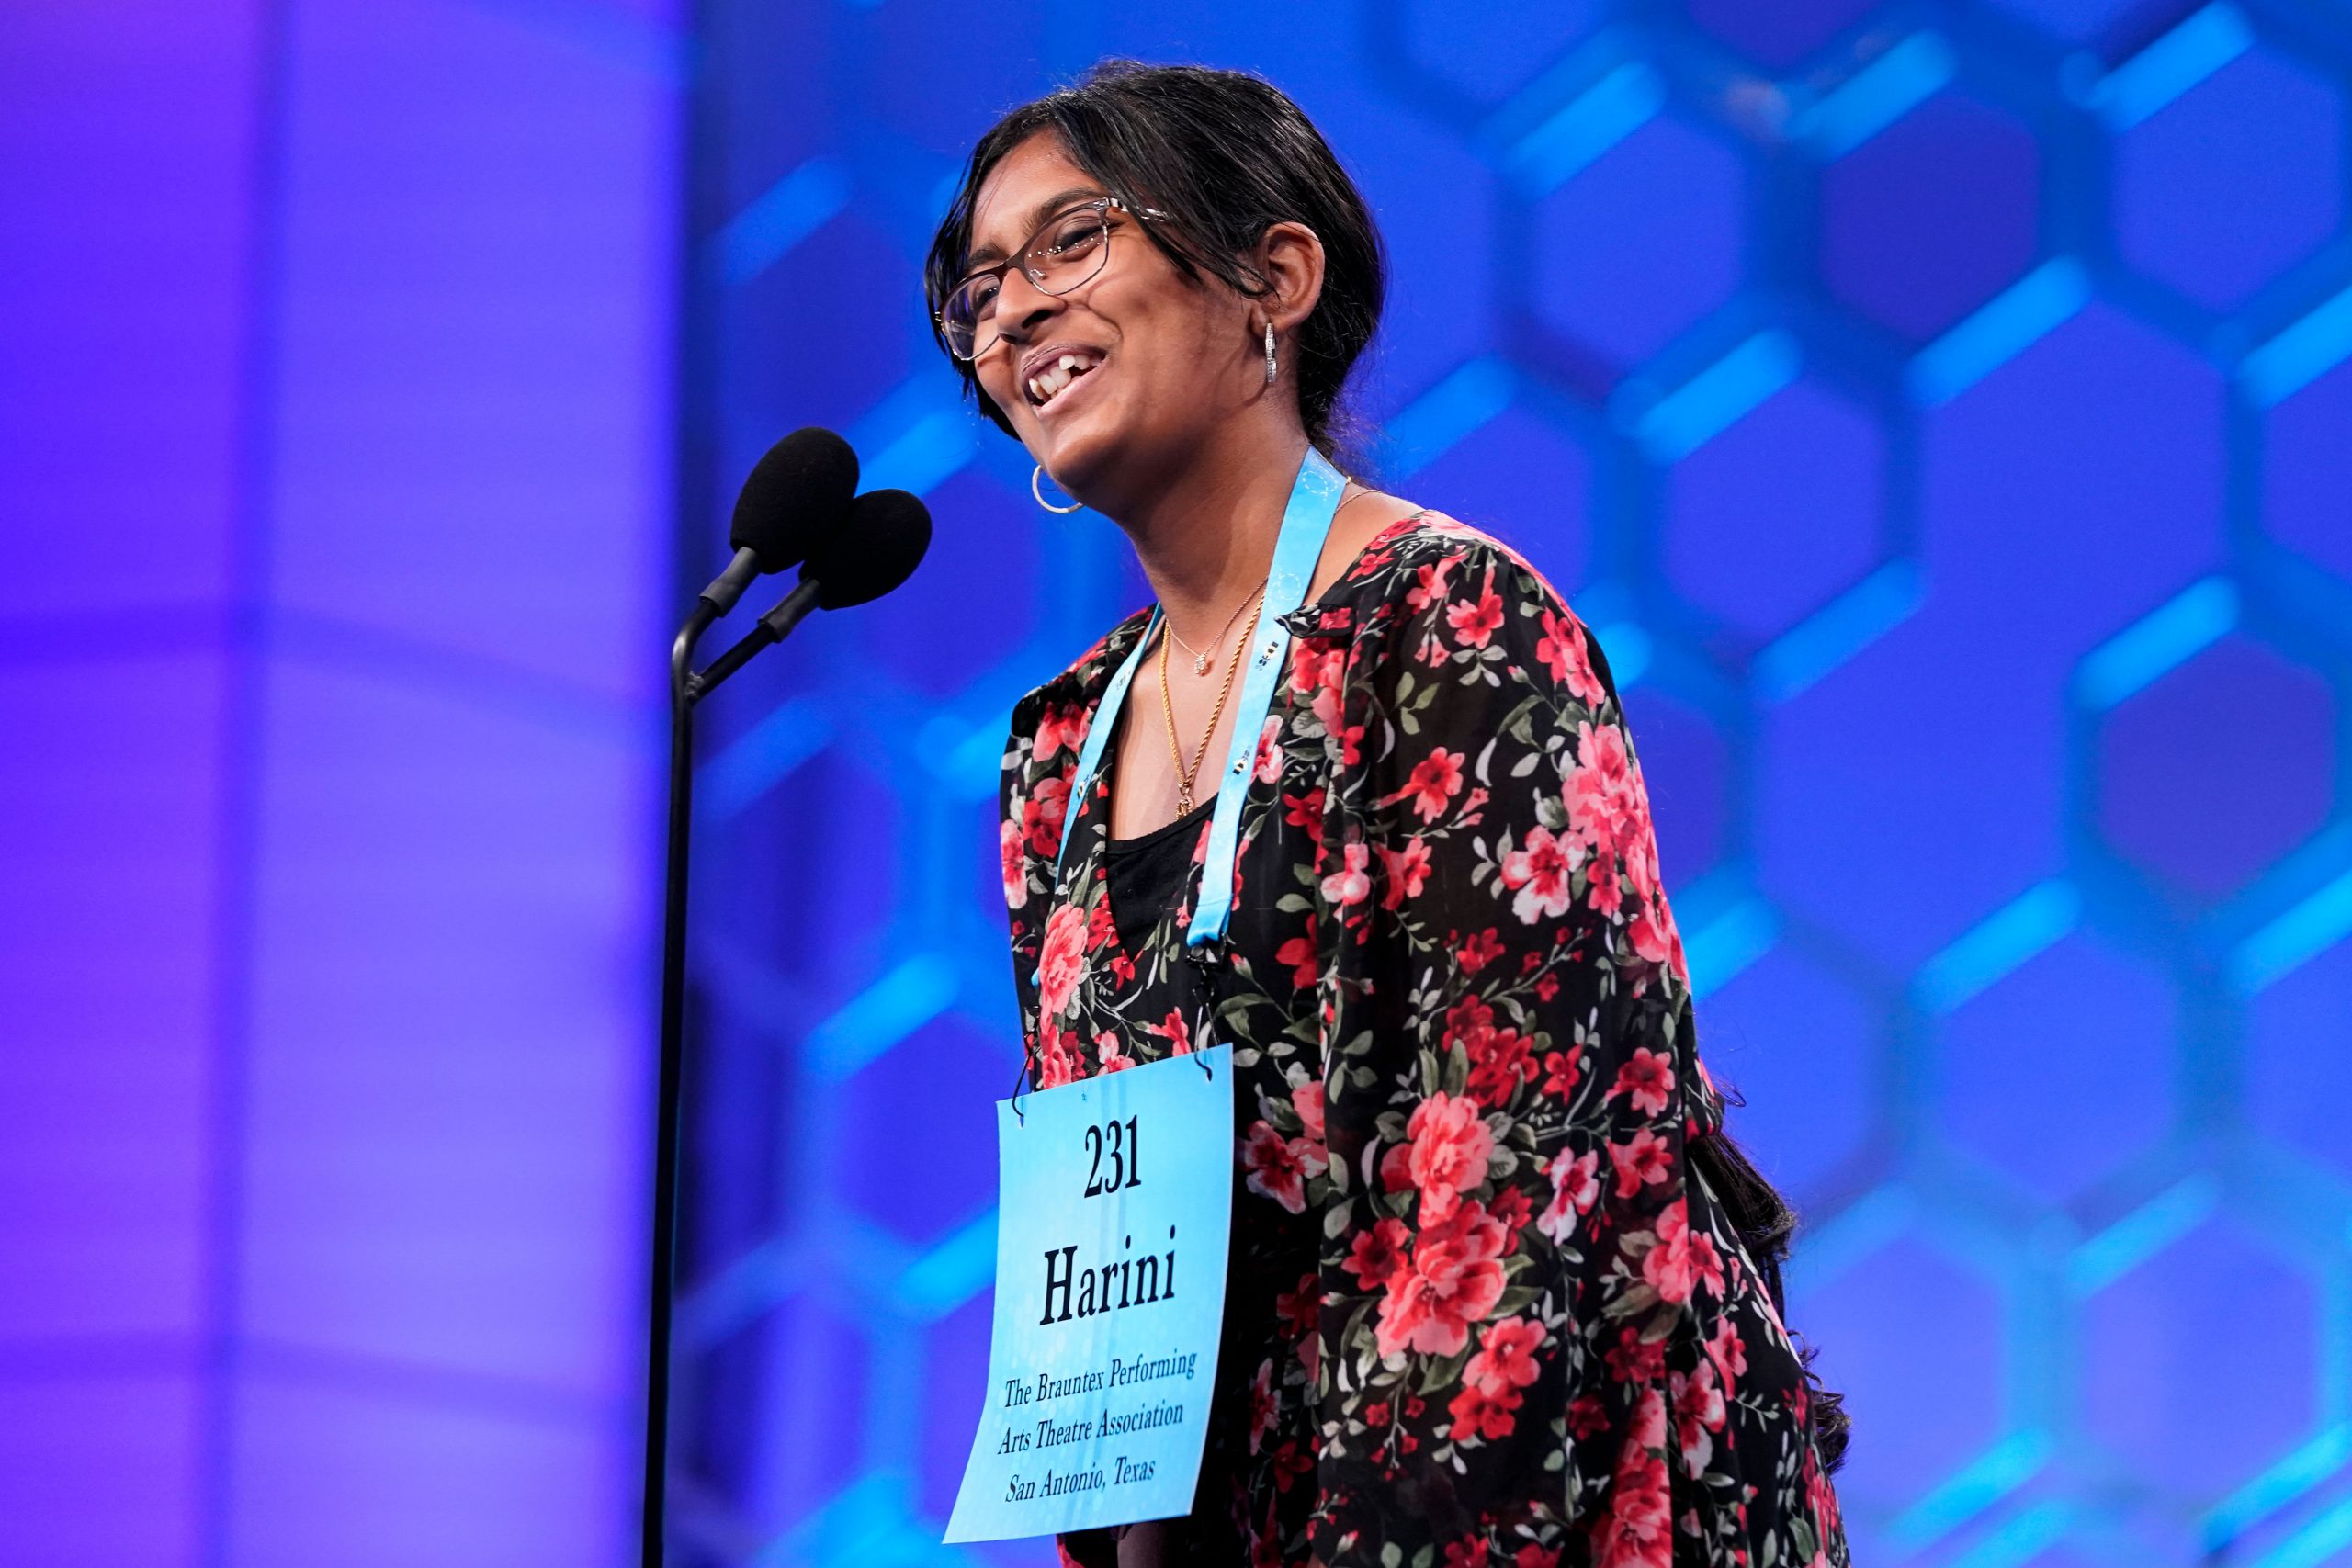 Who is Harini Logan, the winner of Scripps National Spelling Bee 2022